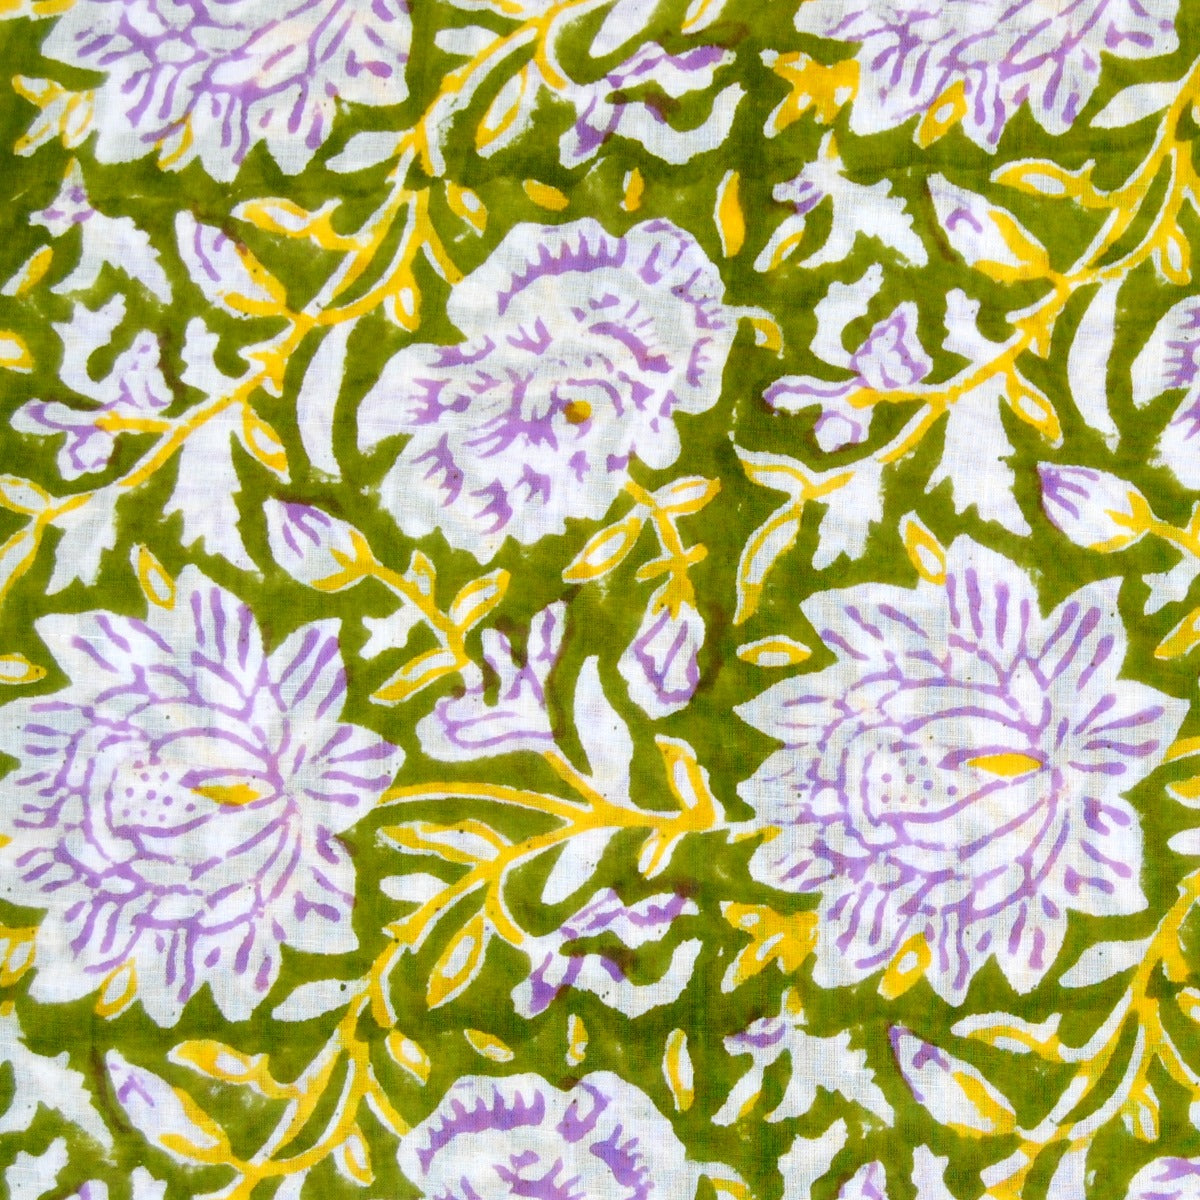 Multicolored Floral Print Cotton Fabric In Wholesale Price - CraftJaipur